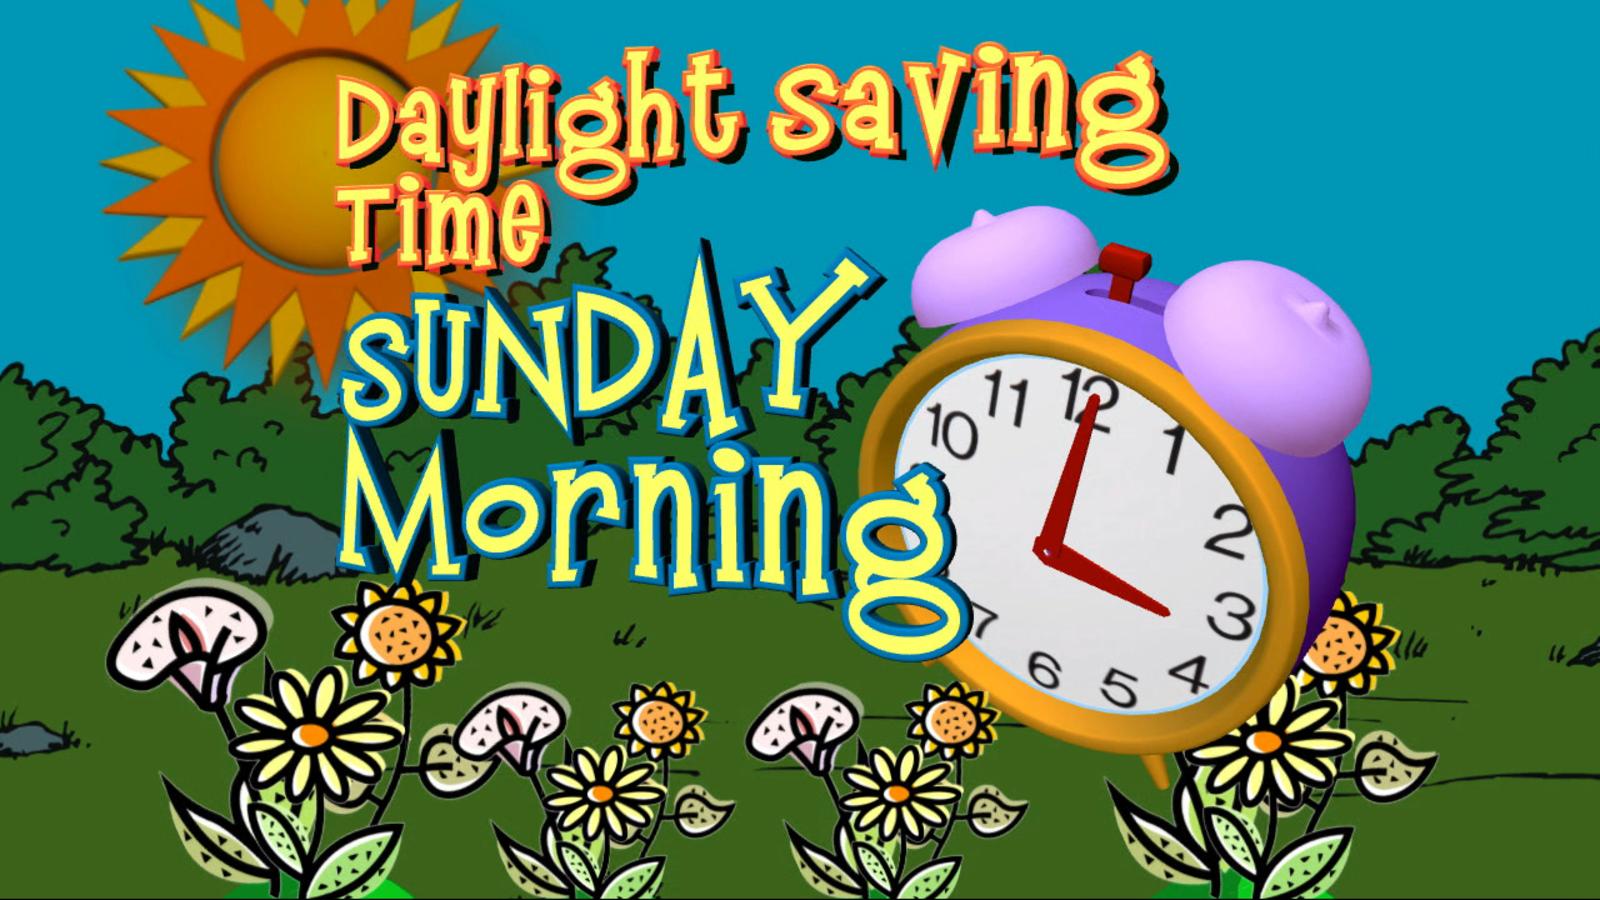 Daylight Saving Time Wallpapers Wallpaper Cave